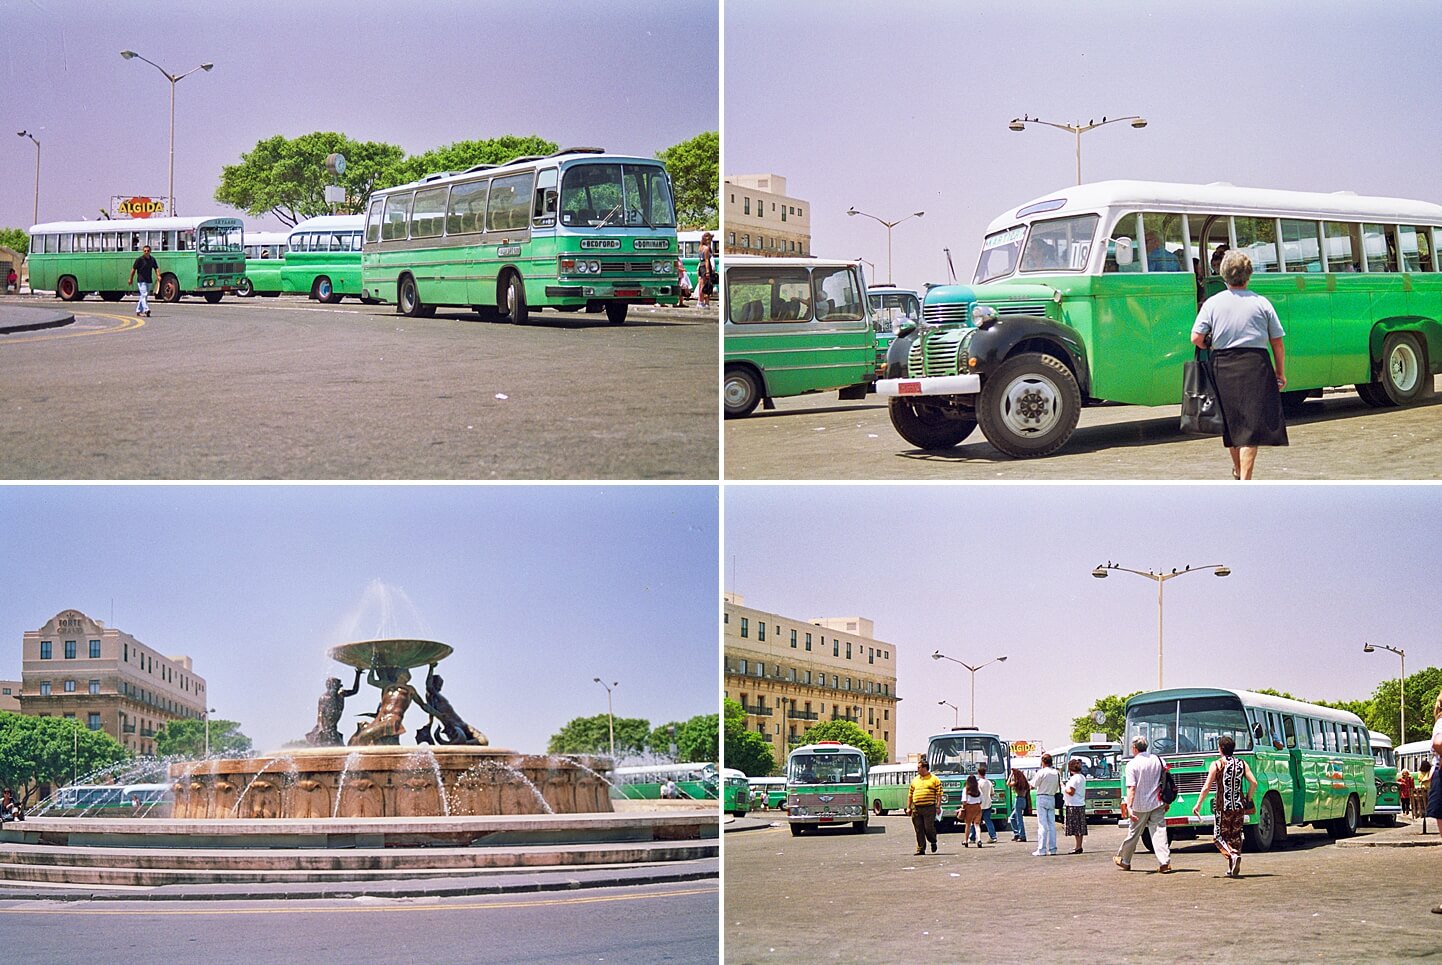 Photo collage of busses in Valletta, Malta by Wedding Photographer Antonio Crutchley | White House Wedding Photography